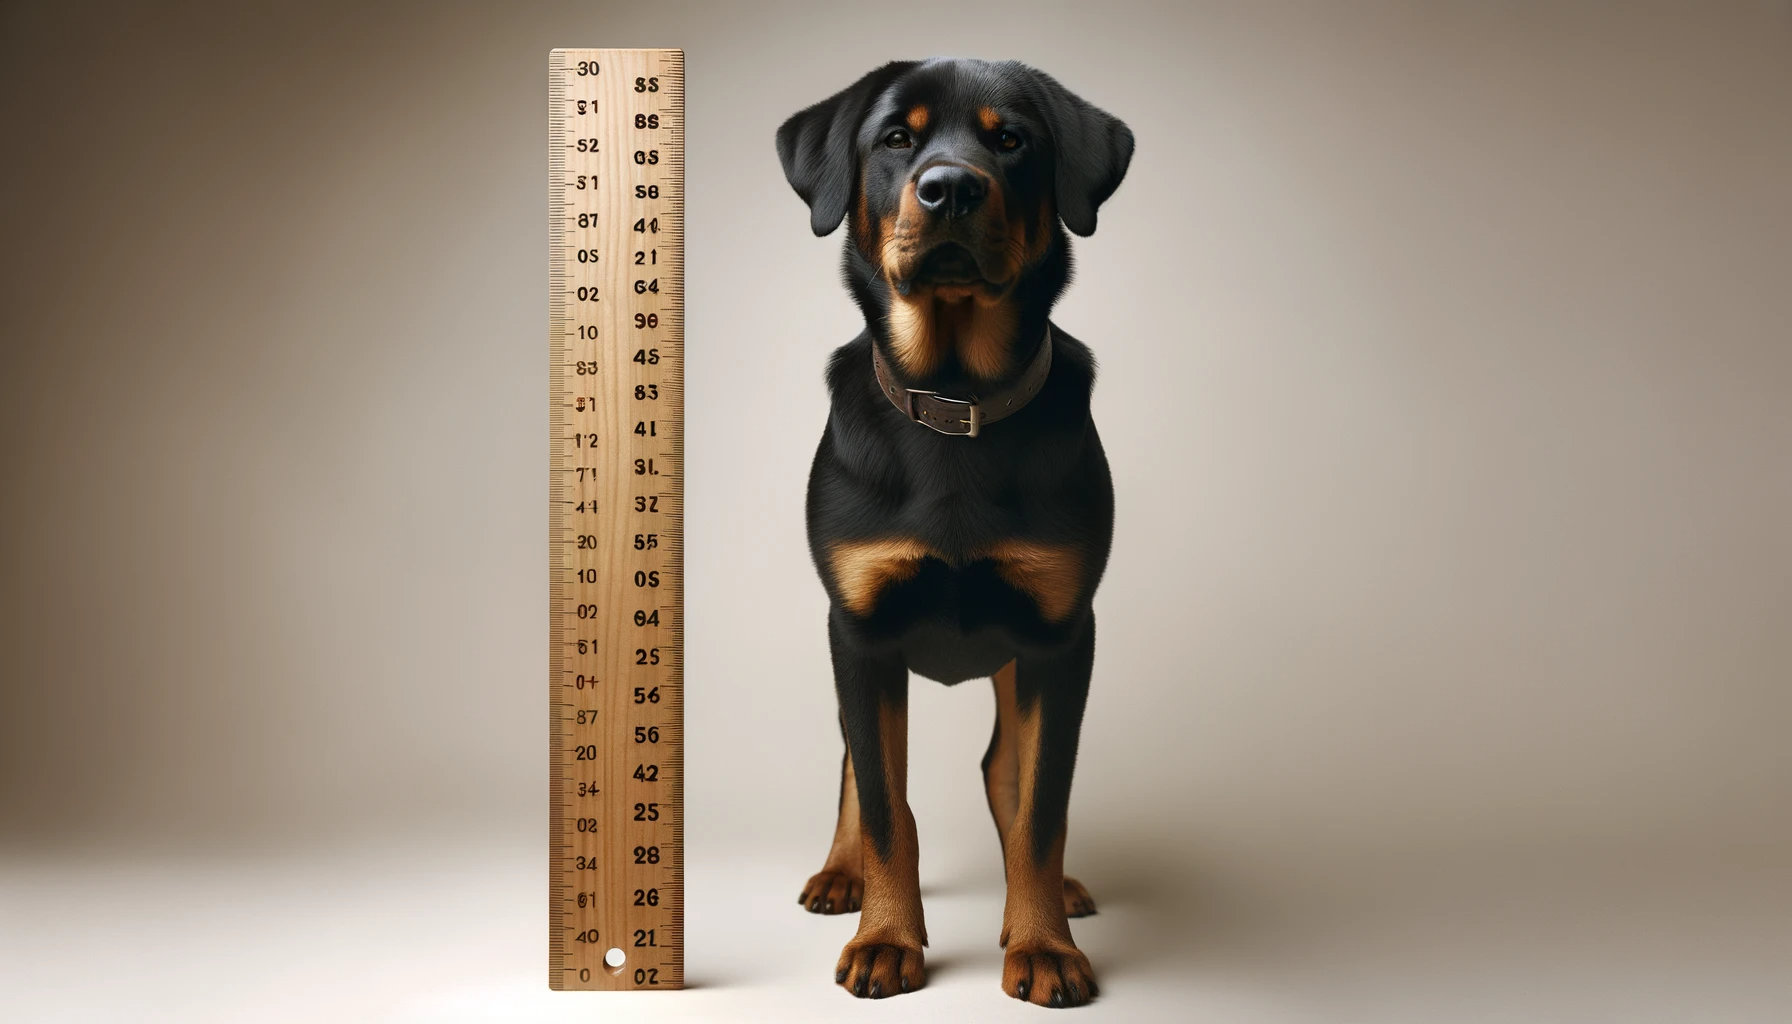 A Labrador mixed with Rottweiler standing next to a ruler, indicating its potential size range